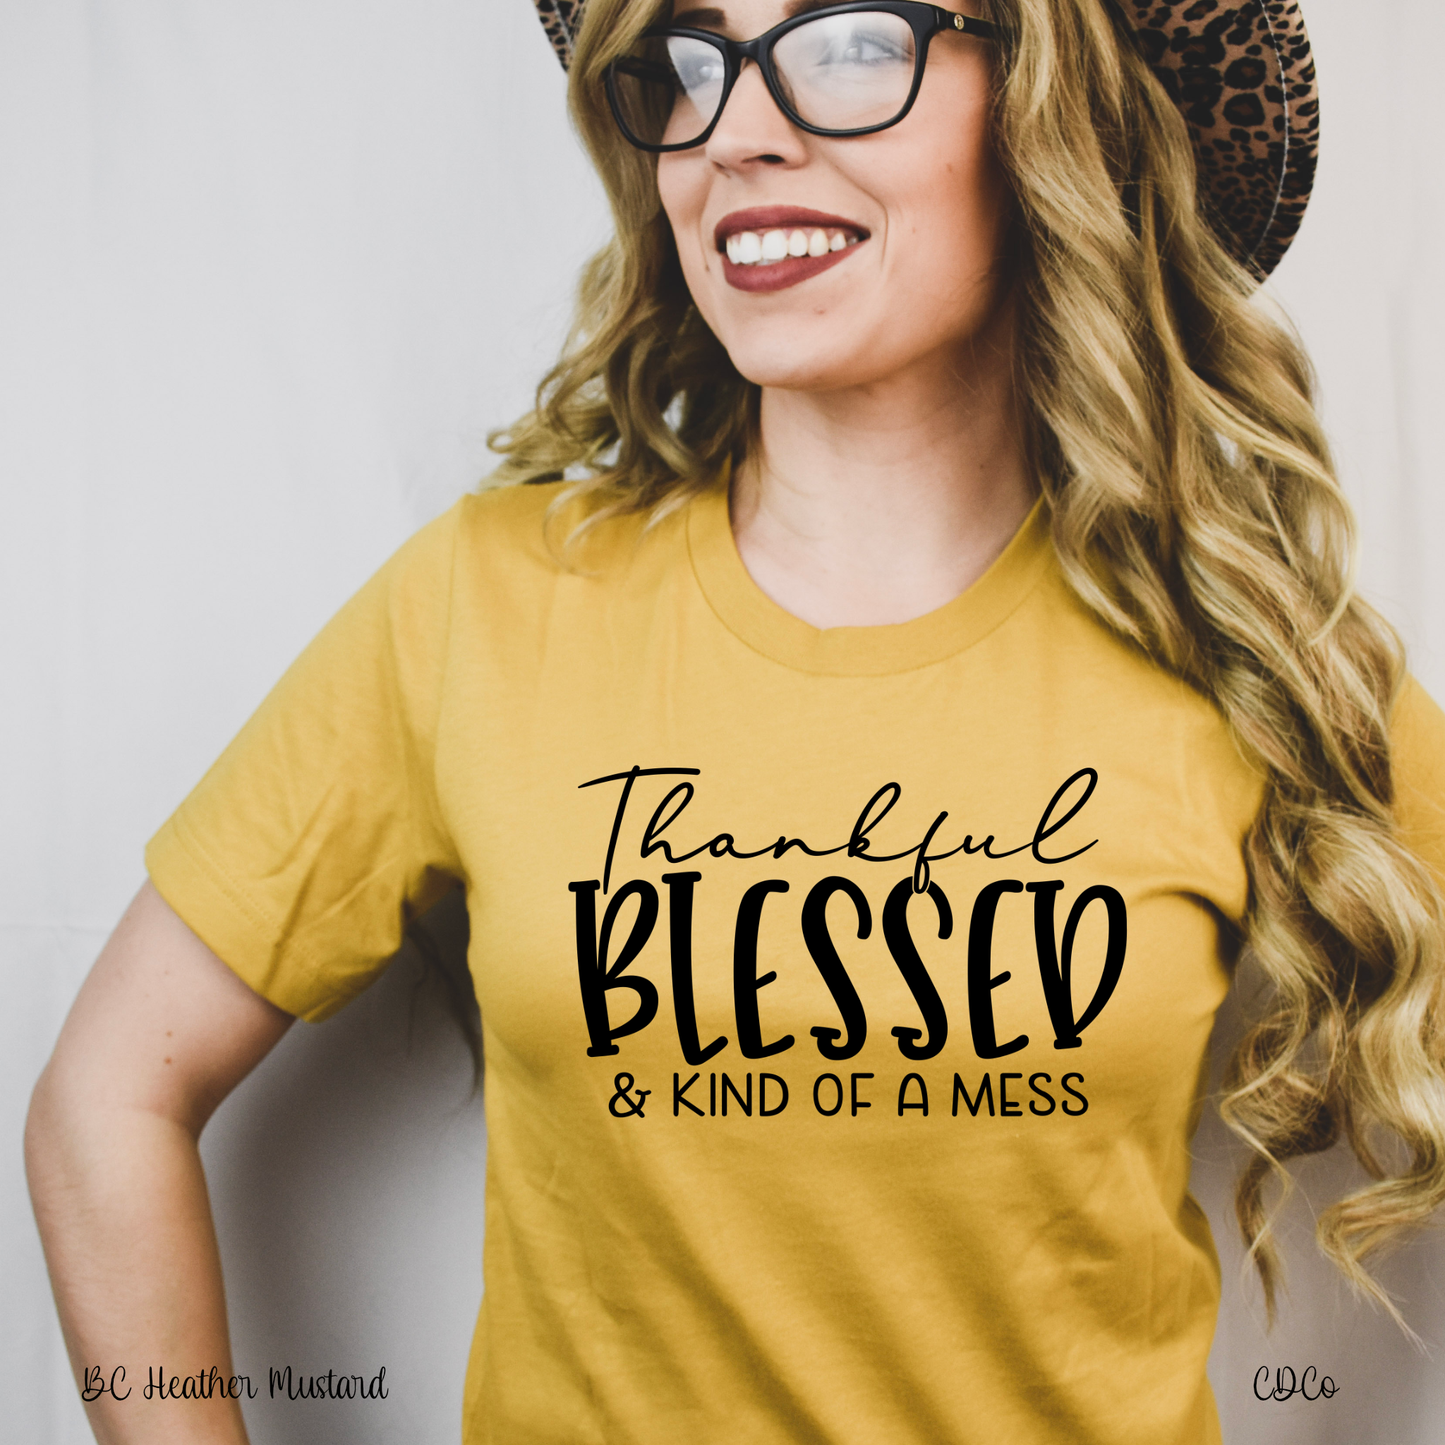 Thankful Blessed & Kind of a Mess - Black (325°)